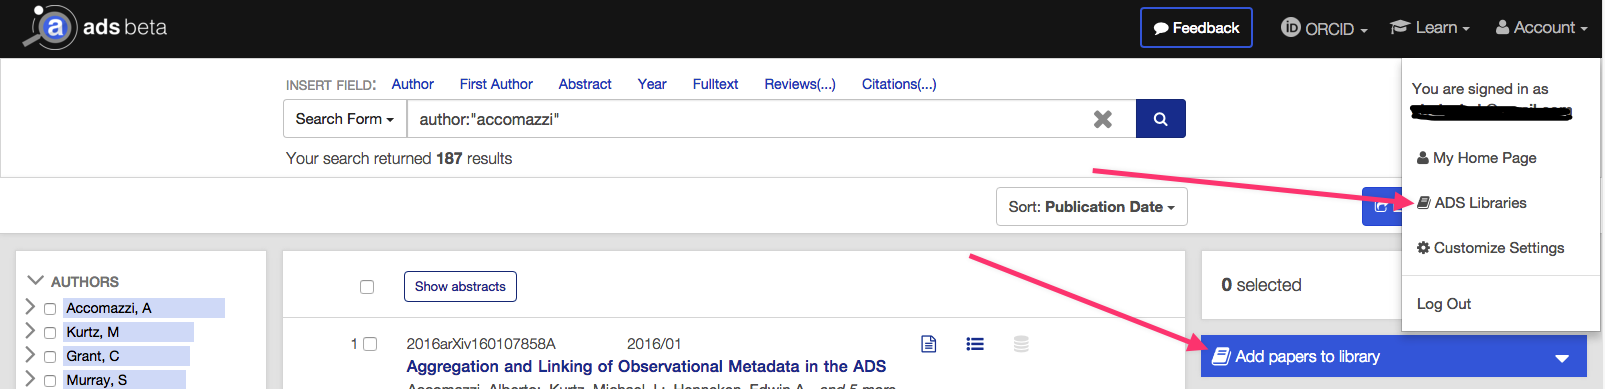 a screenshot of the ads search results interface showing the ads libraries button